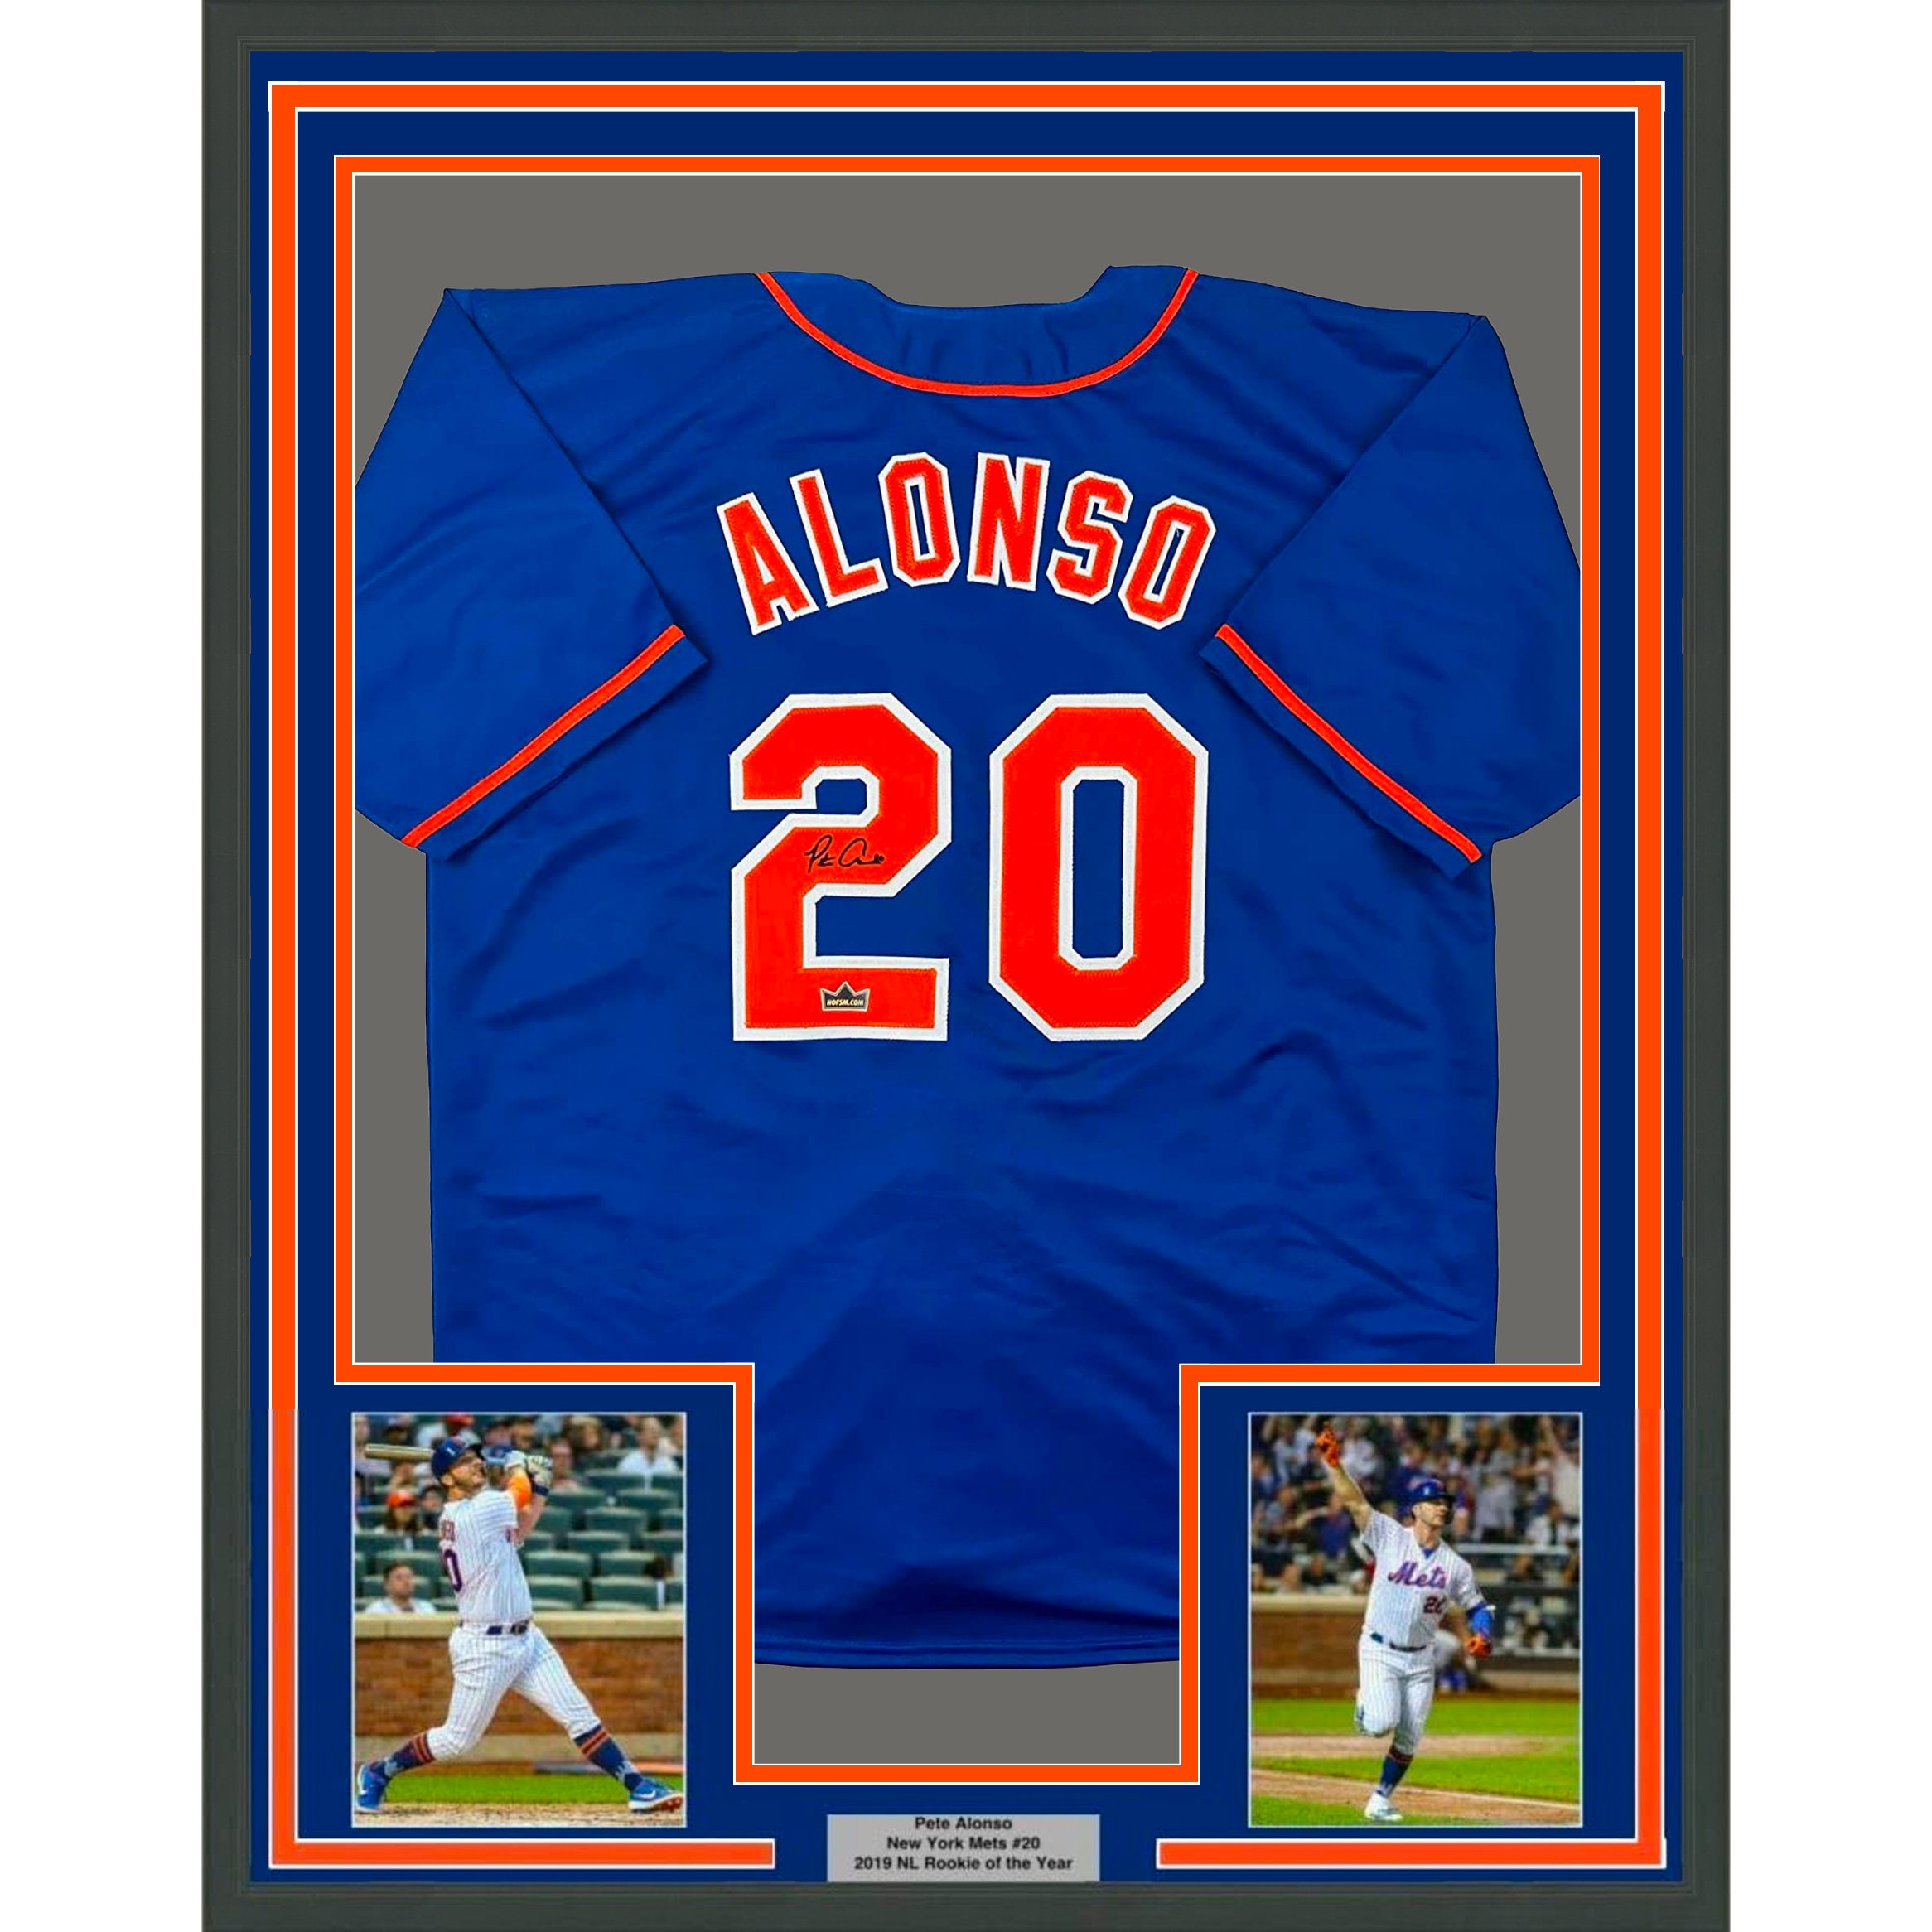 Pete Alonso Signed 2019 All-Star Game Jersey (Fanatics Hologram